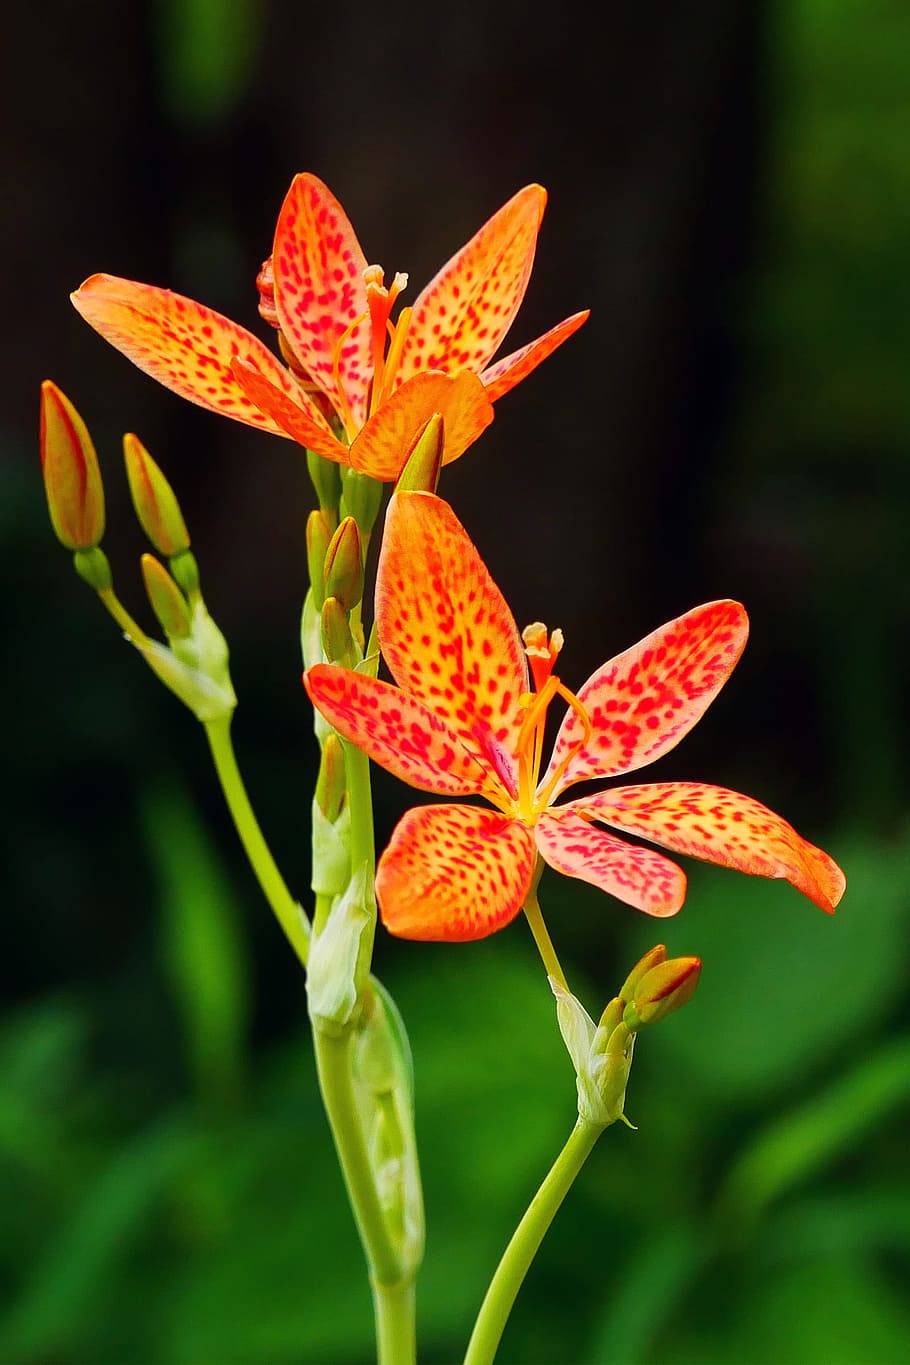 leopard flowers, green, background., buds, ornamental, plant iris domestica, commonly, known, leopard lily, blackberry lily